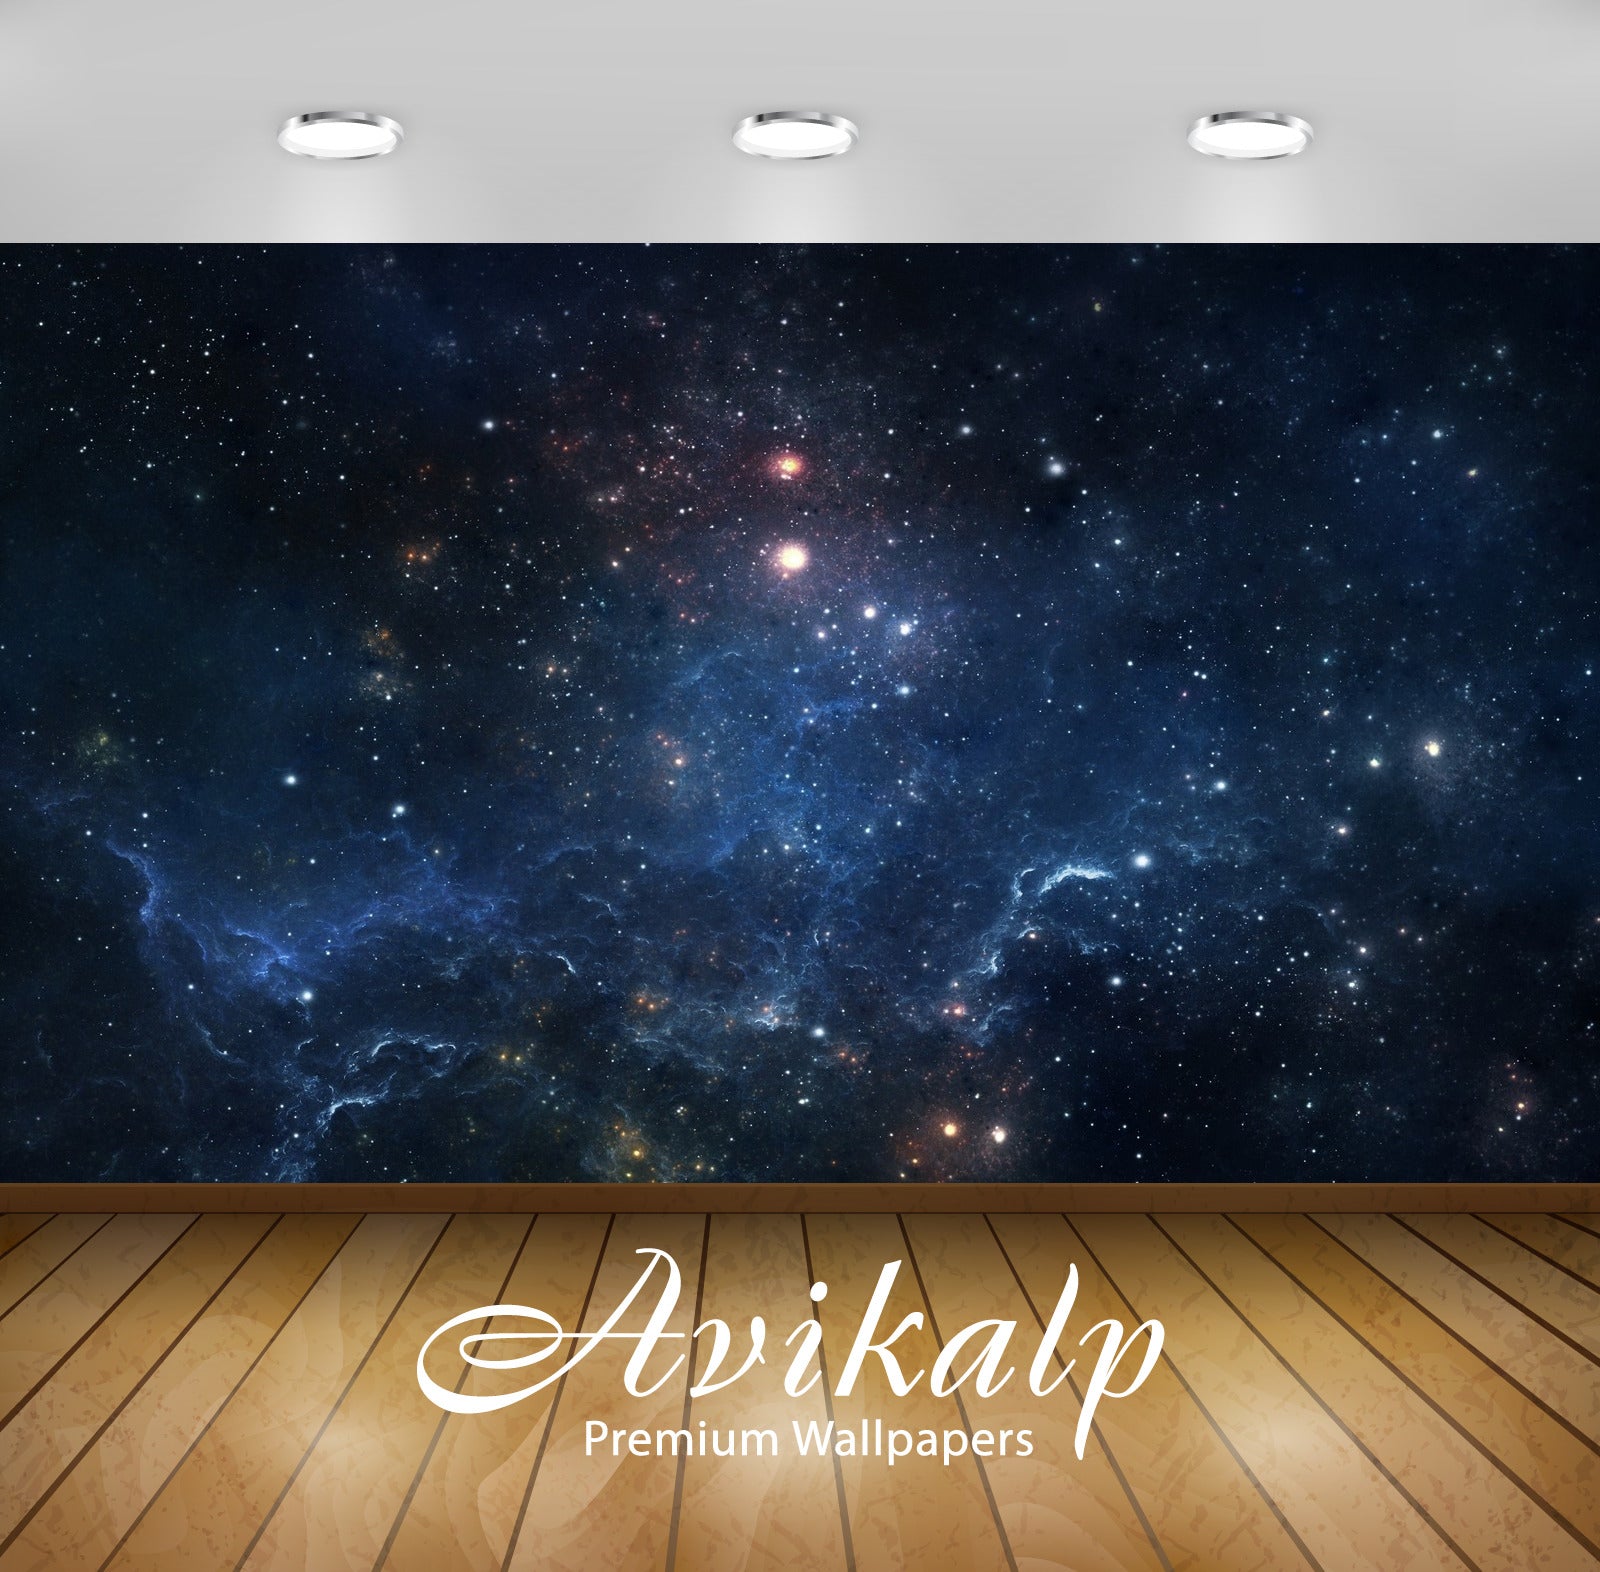 Avikalp Exclusive Awi1577 Space Full HD Wallpapers for Living room, Hall, Kids Room, Kitchen, TV Bac